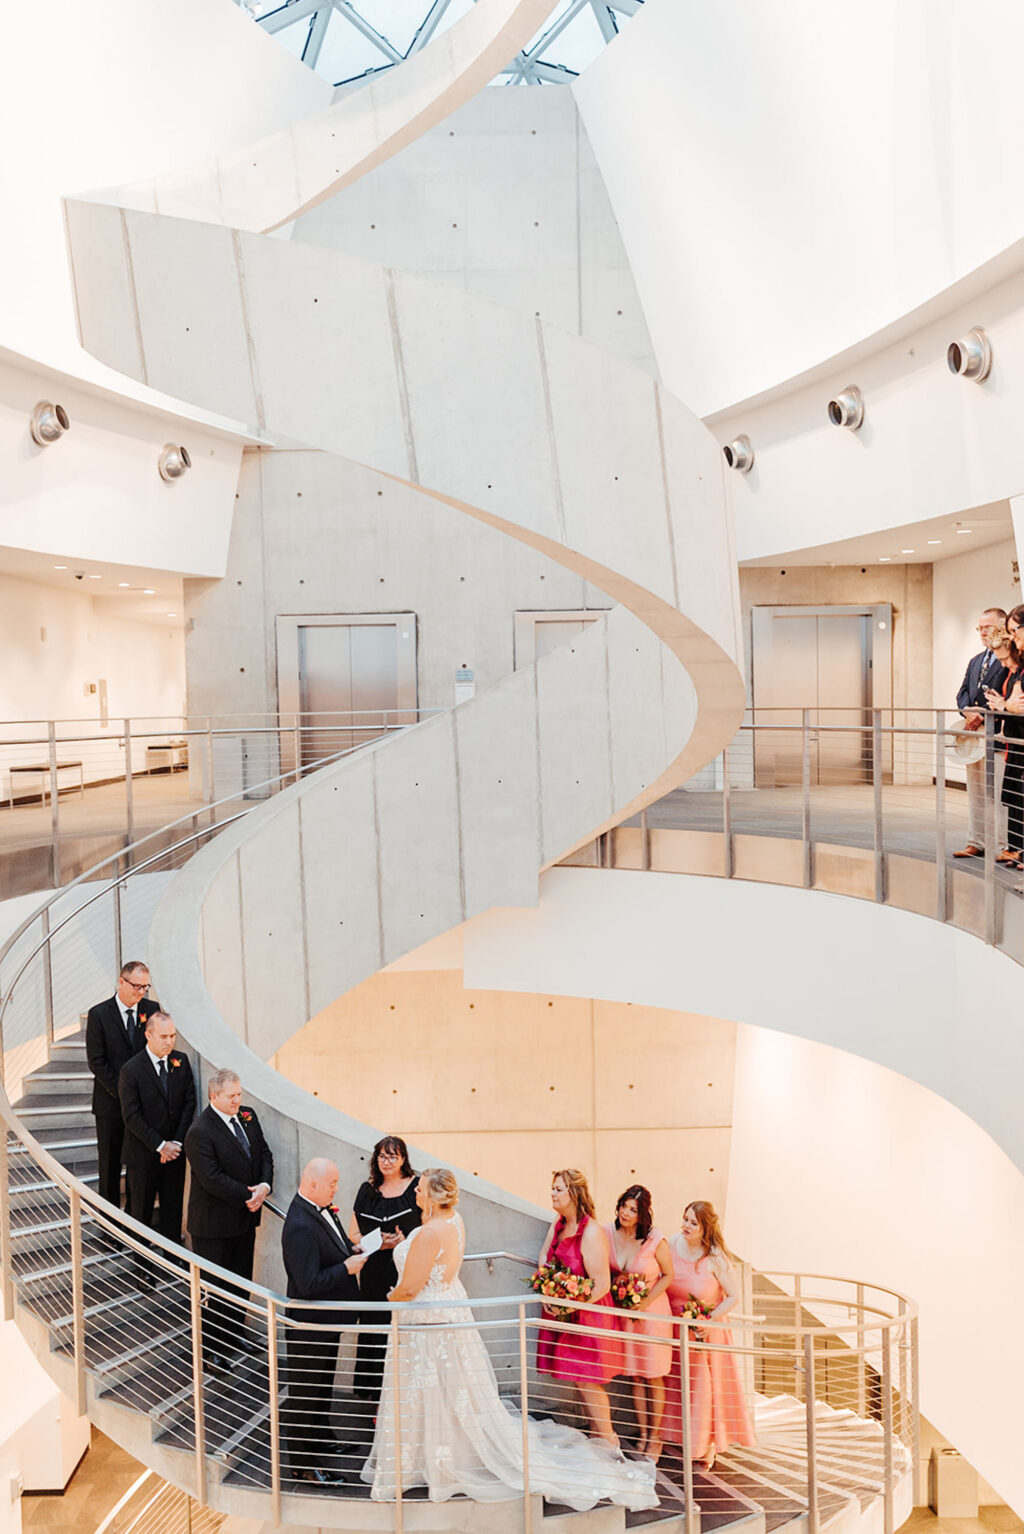 Wedding Ceremony on the Staircase | St Petersburg Venue Dali Museum | Planner UNIQUE Weddings & Events